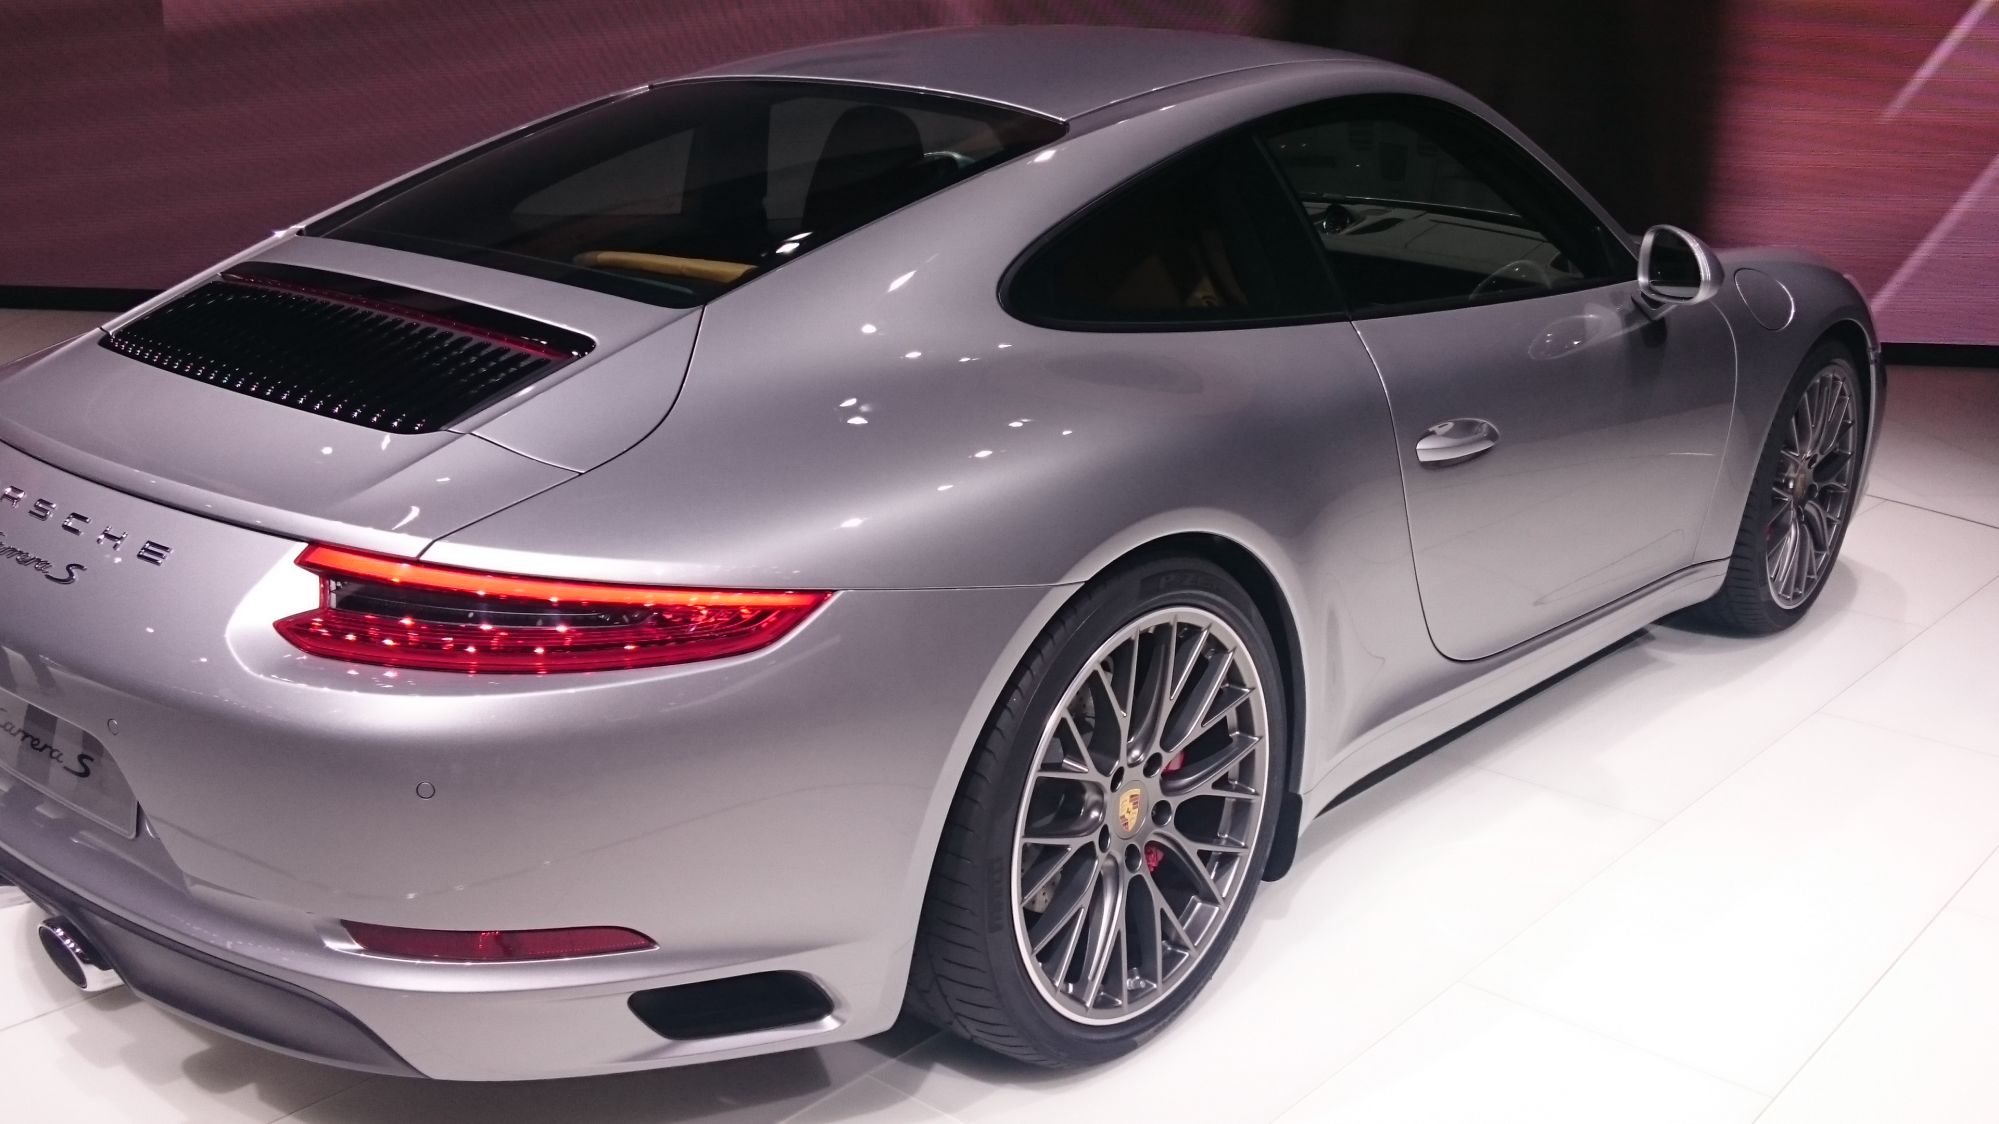 Pictures from the IAA in Frankfurt of the new Porsche